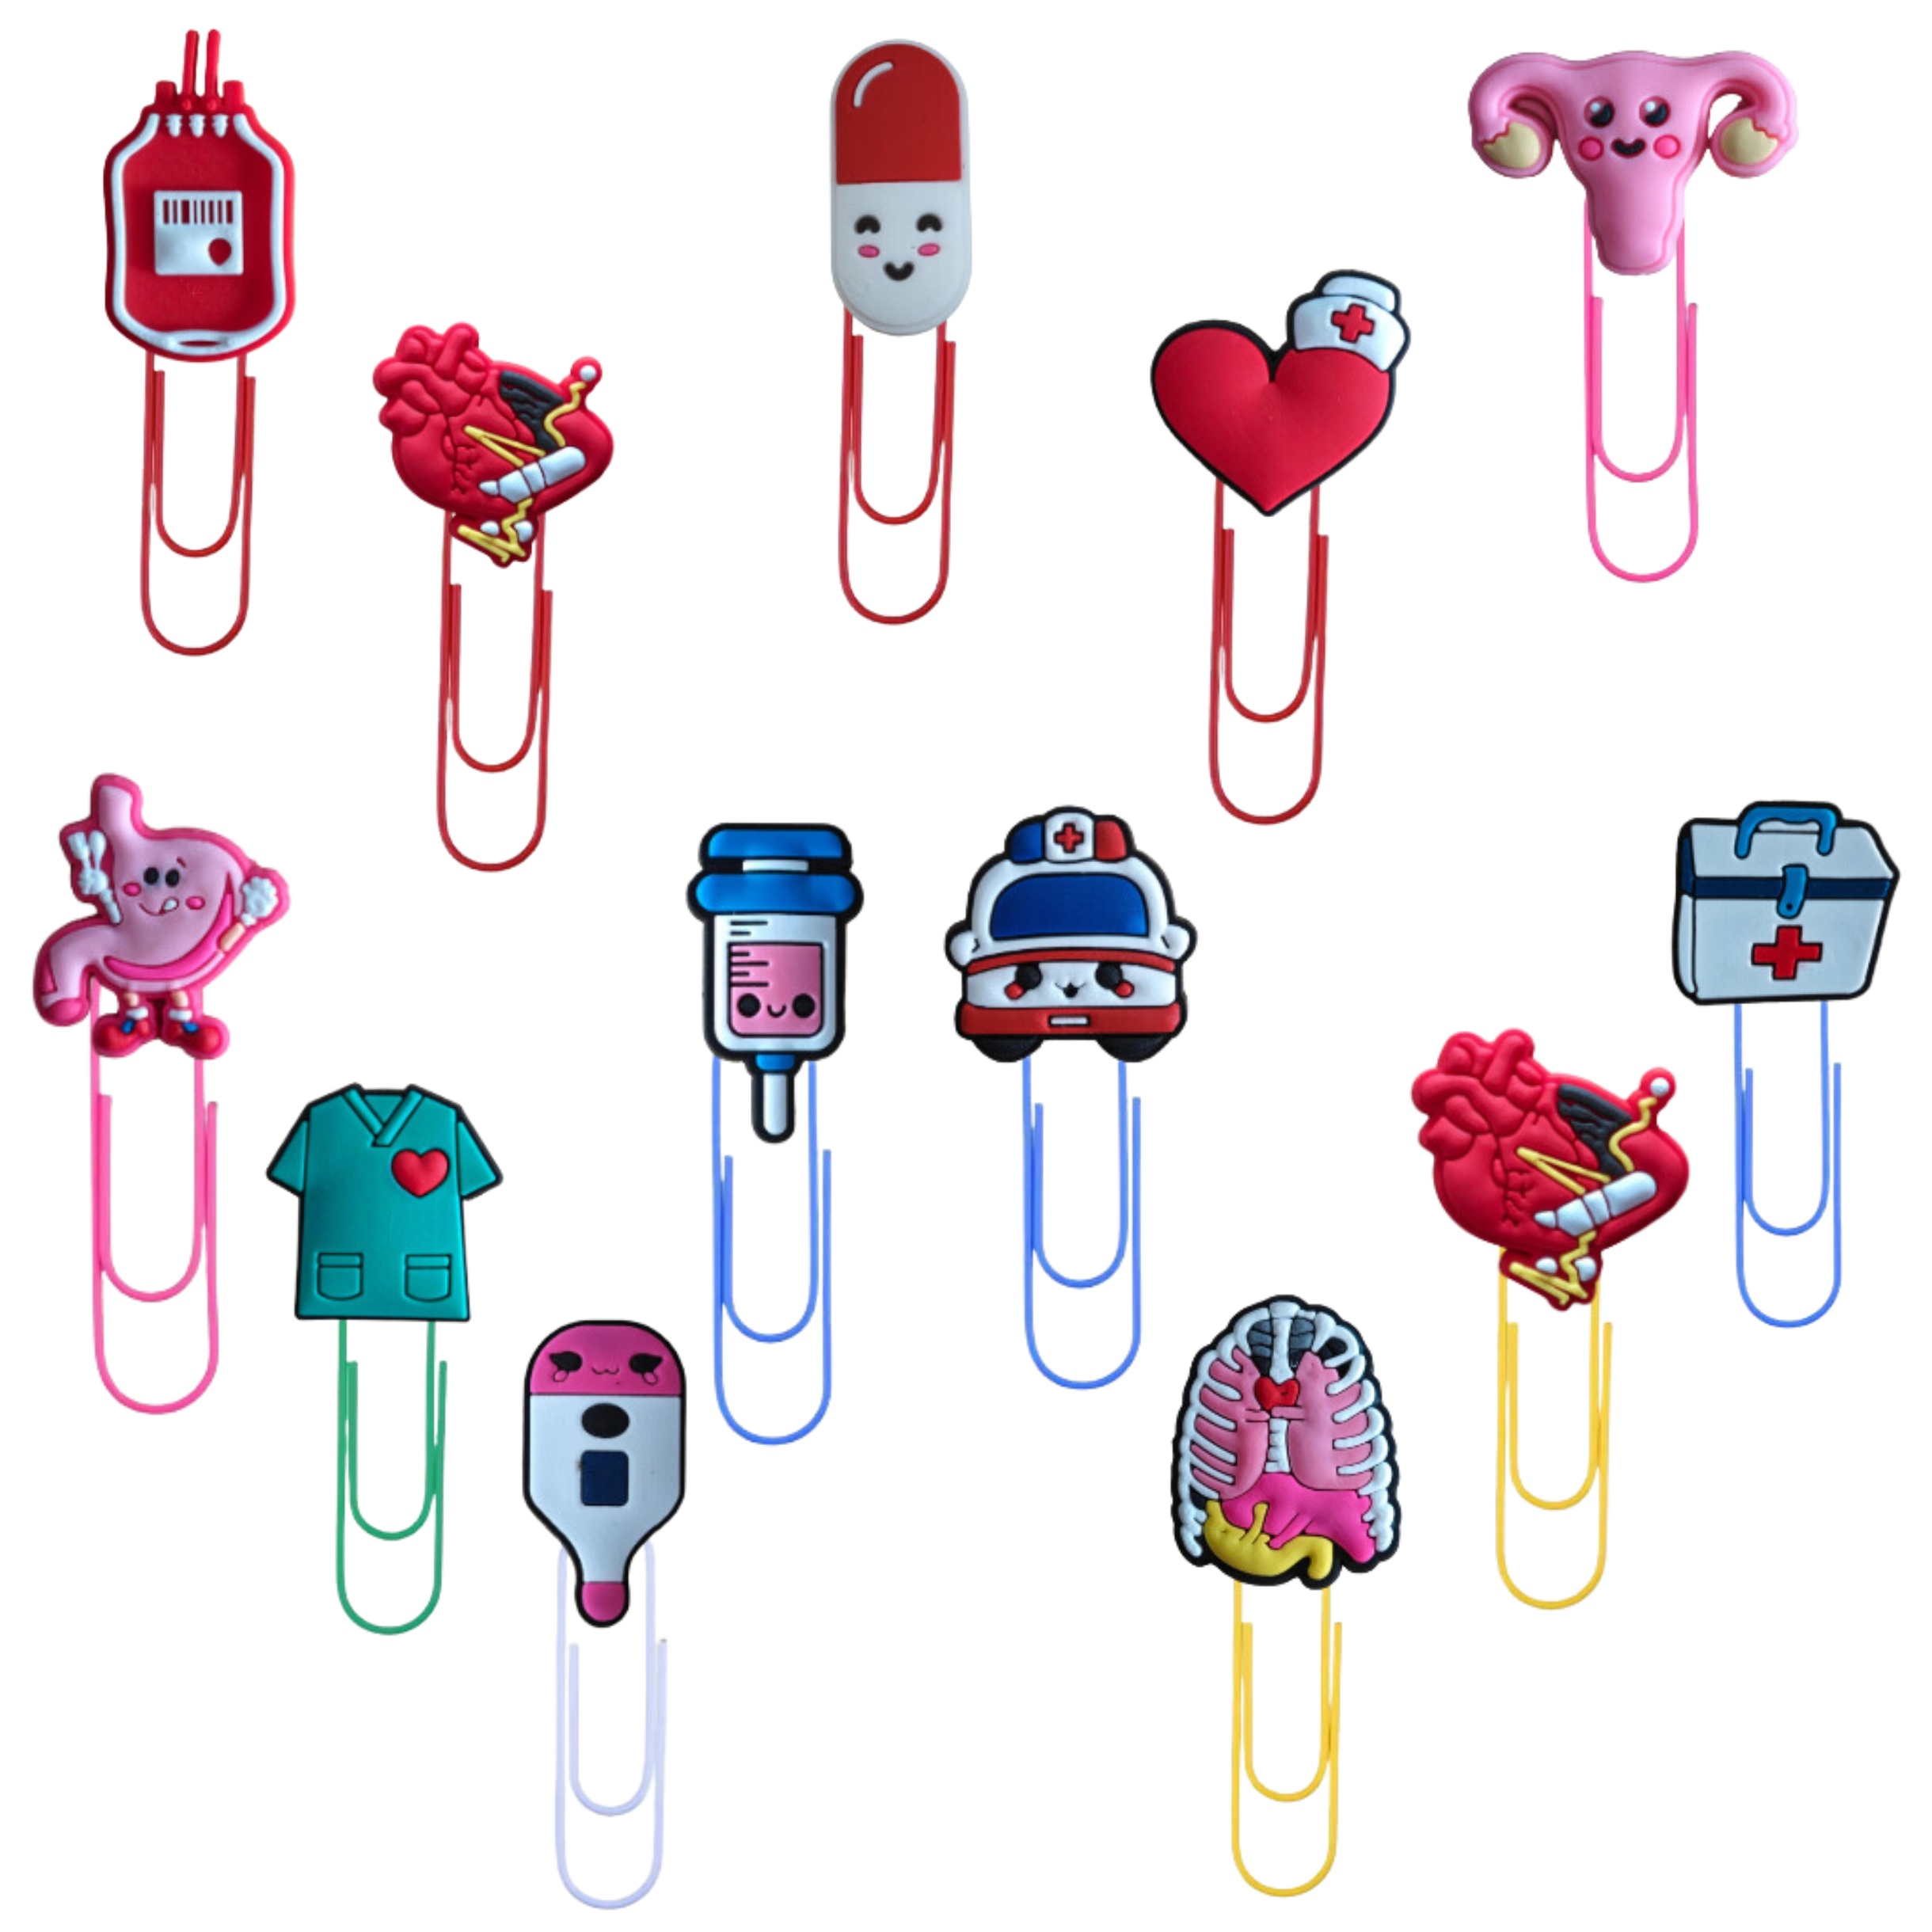 

6/13pcs Cute Cartoon Medical Paper Clips Colorful Office Supplies Accessories Bookmark Pliers Desk Stationery School Books File Page Markers Welcome Gift